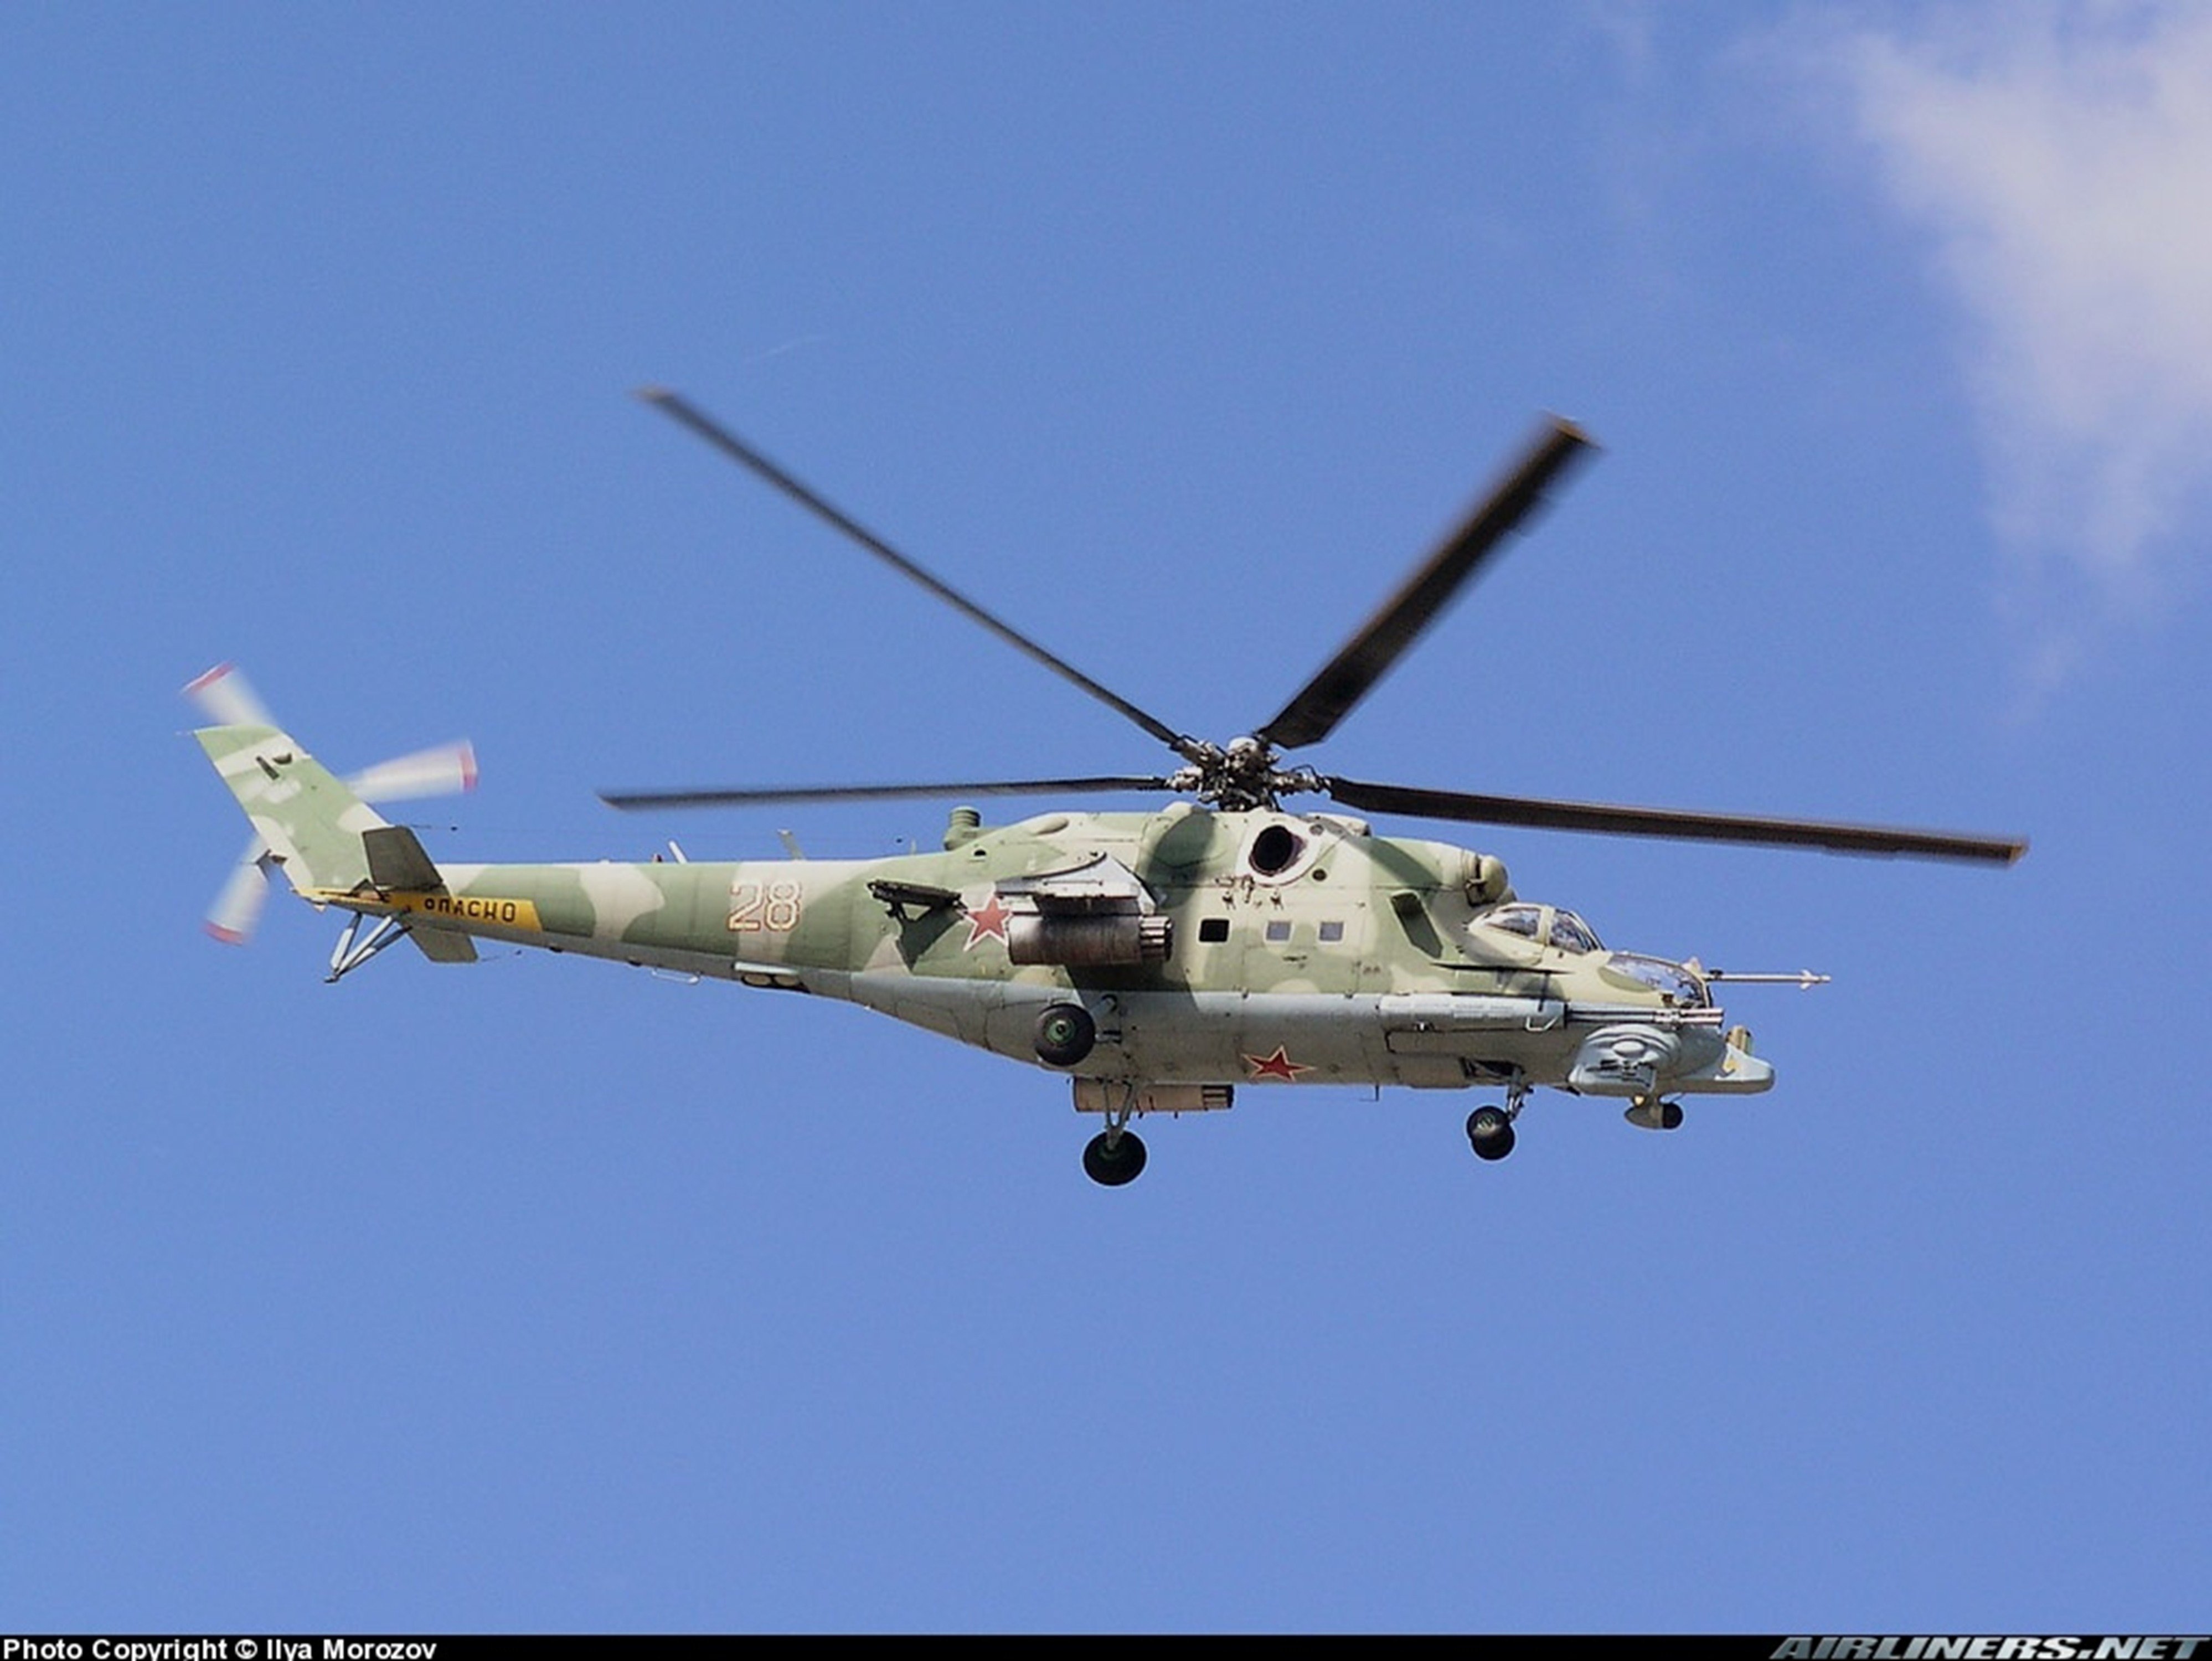 russian, Red, Star, Russia, Helicopter, Aircraft, Attack, Military, Army, Mil mi Wallpaper